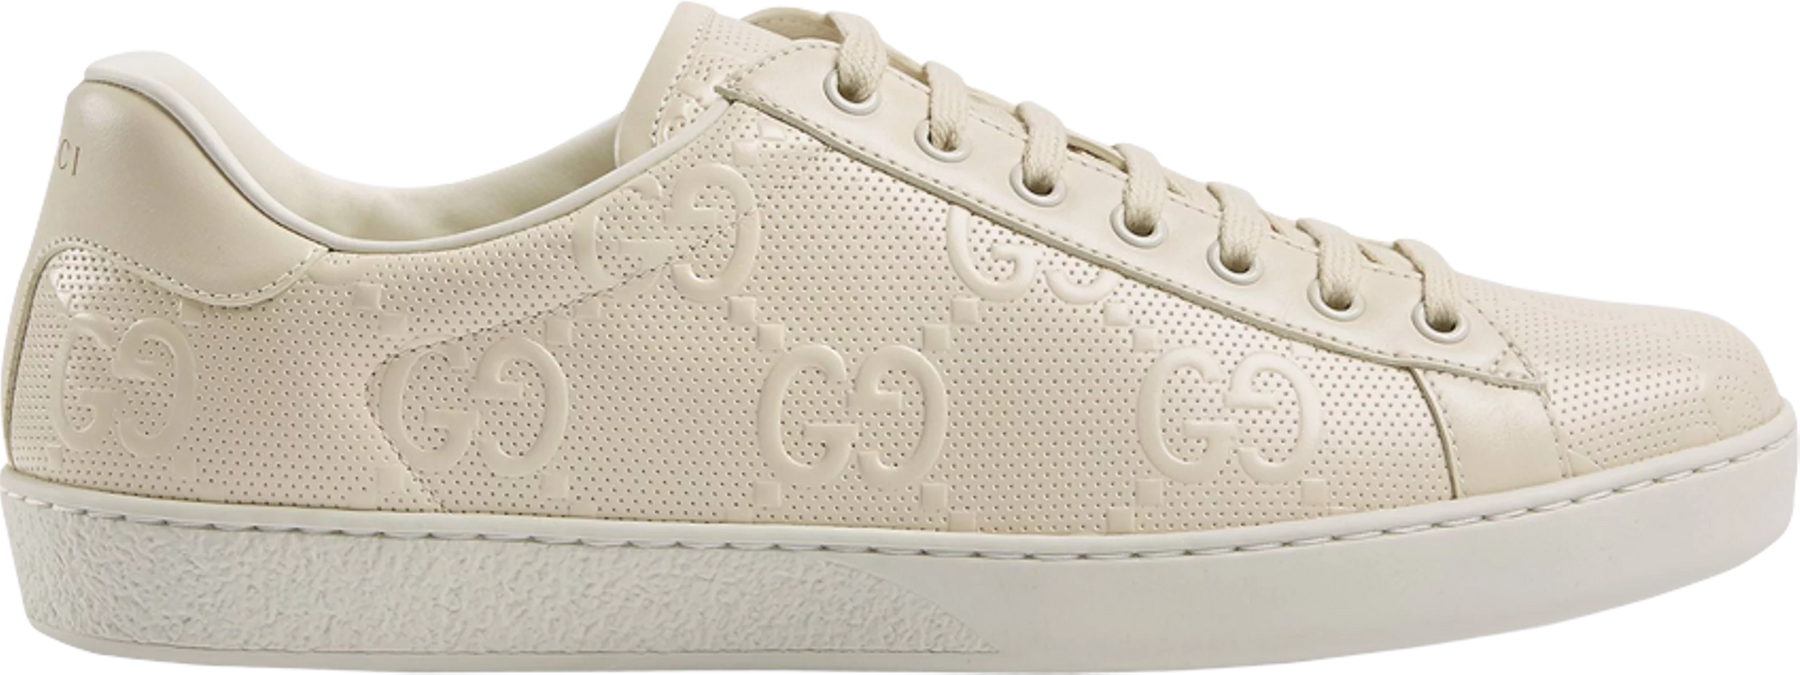 Gucci Ace GG Embossed "White" (PreOwned)